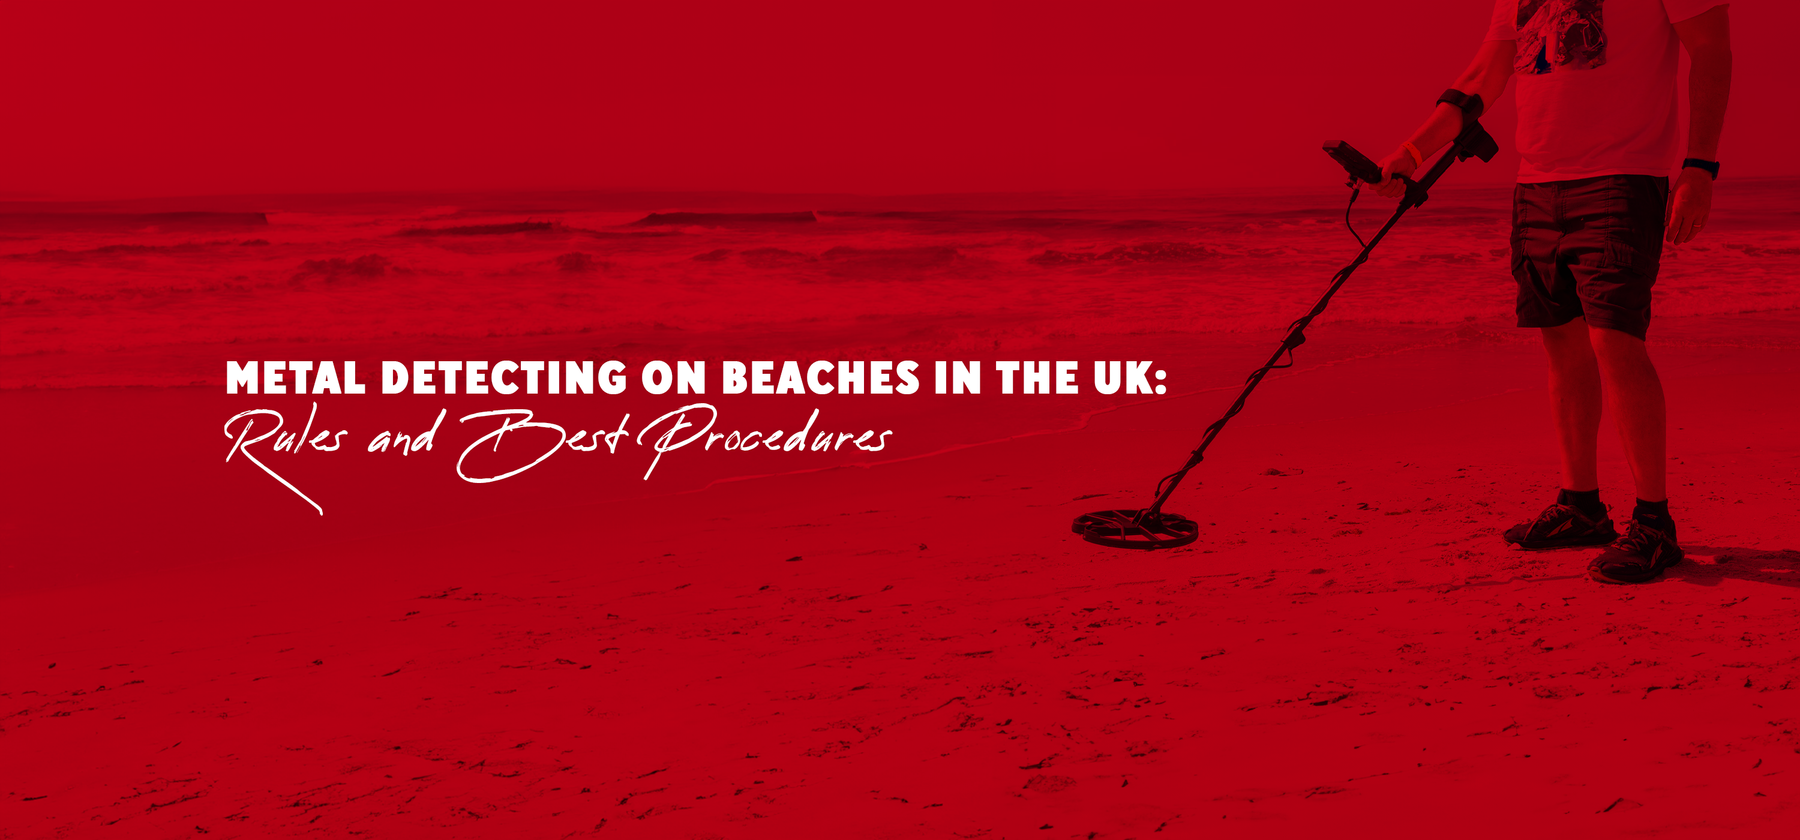 Metal Detecting on Beaches in the UK: Rules and Best Procedures